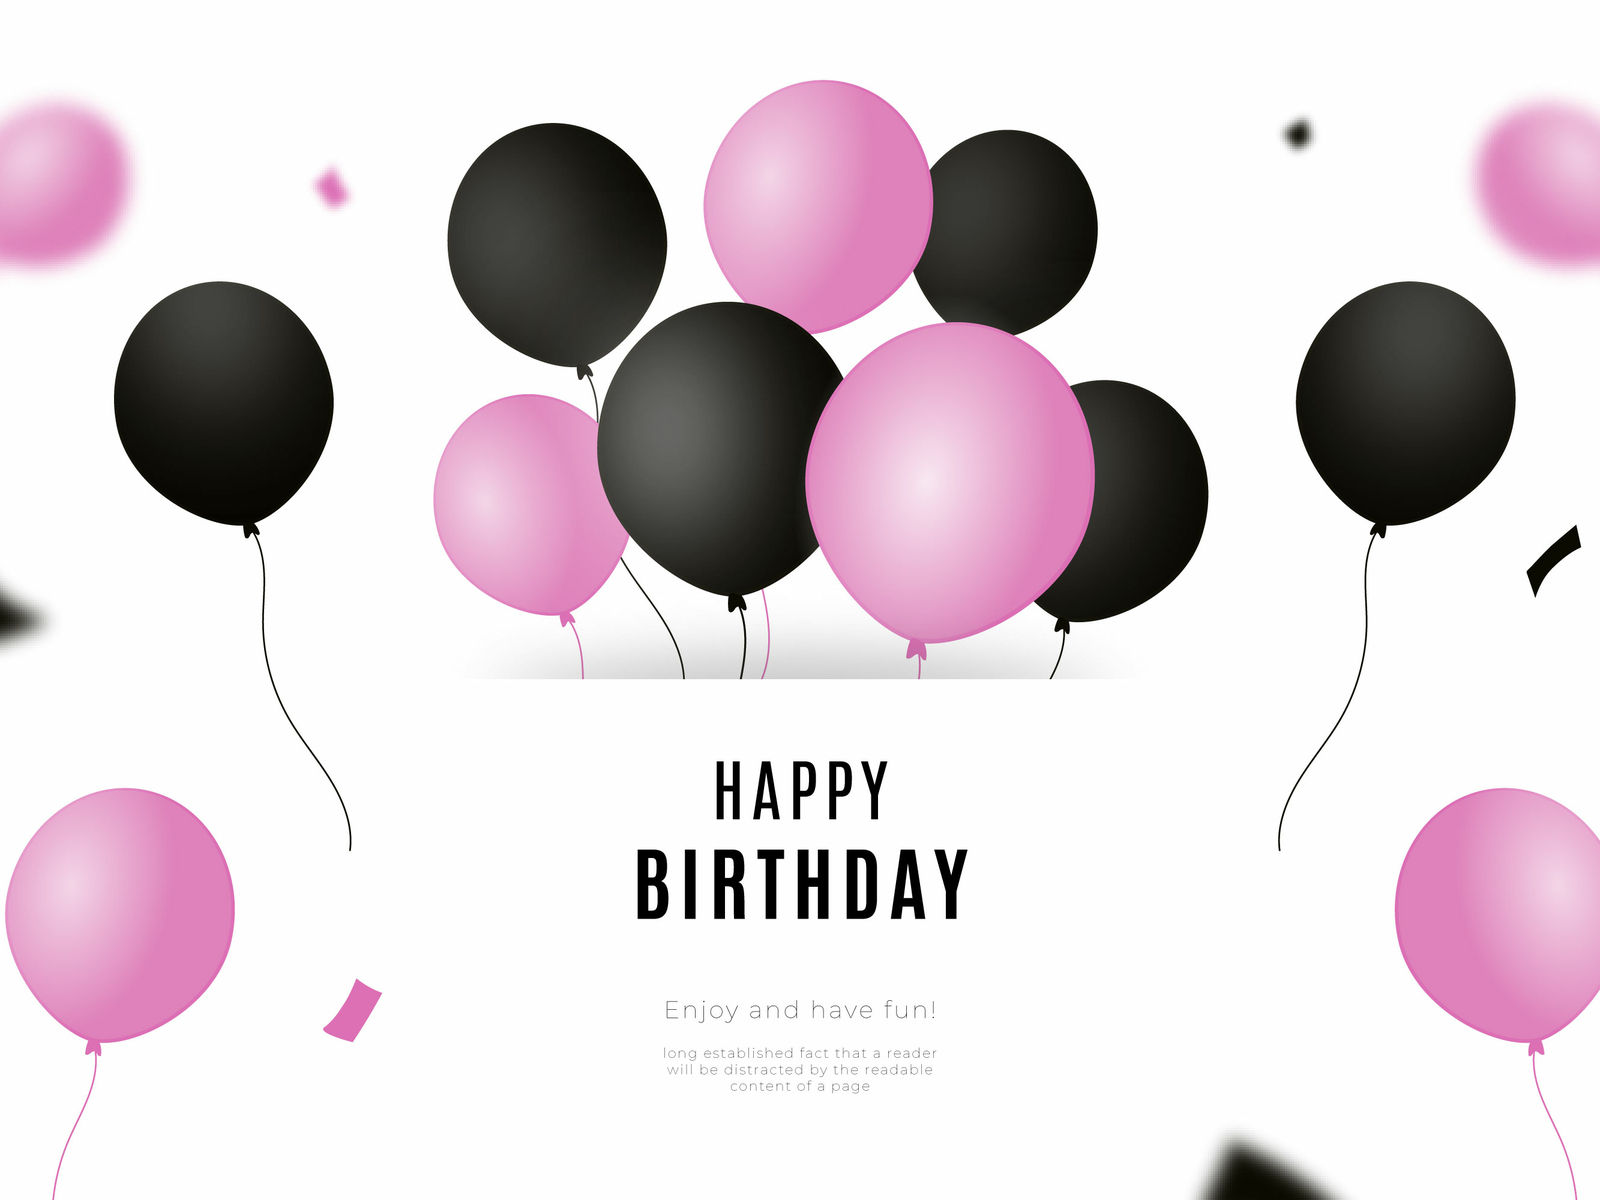 Happy birthday background with black and pink balloons by sara on Dribbble